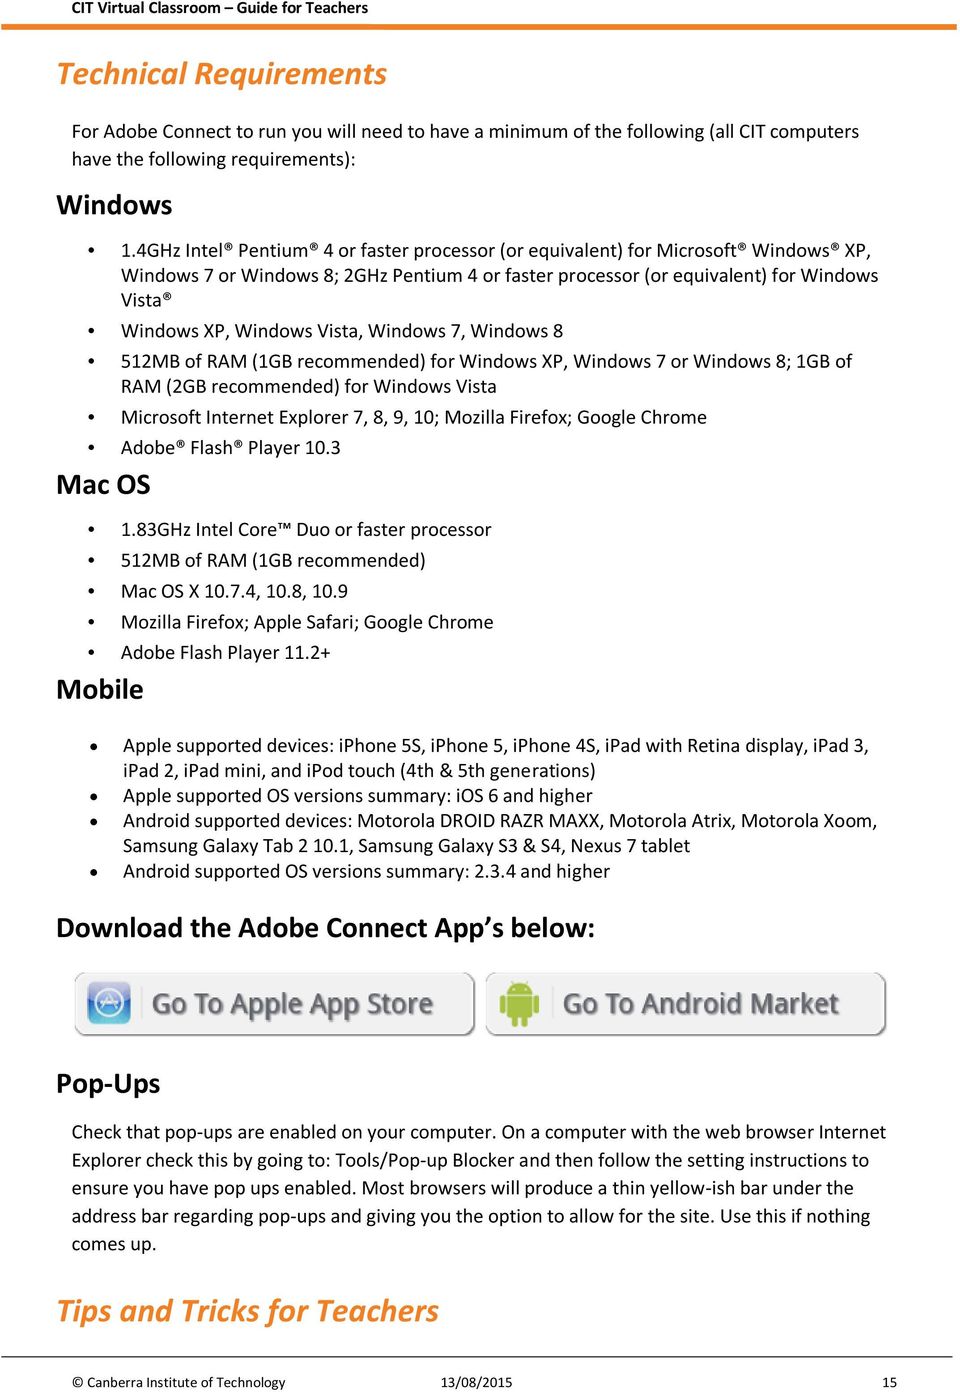 adobe connect for mac os x